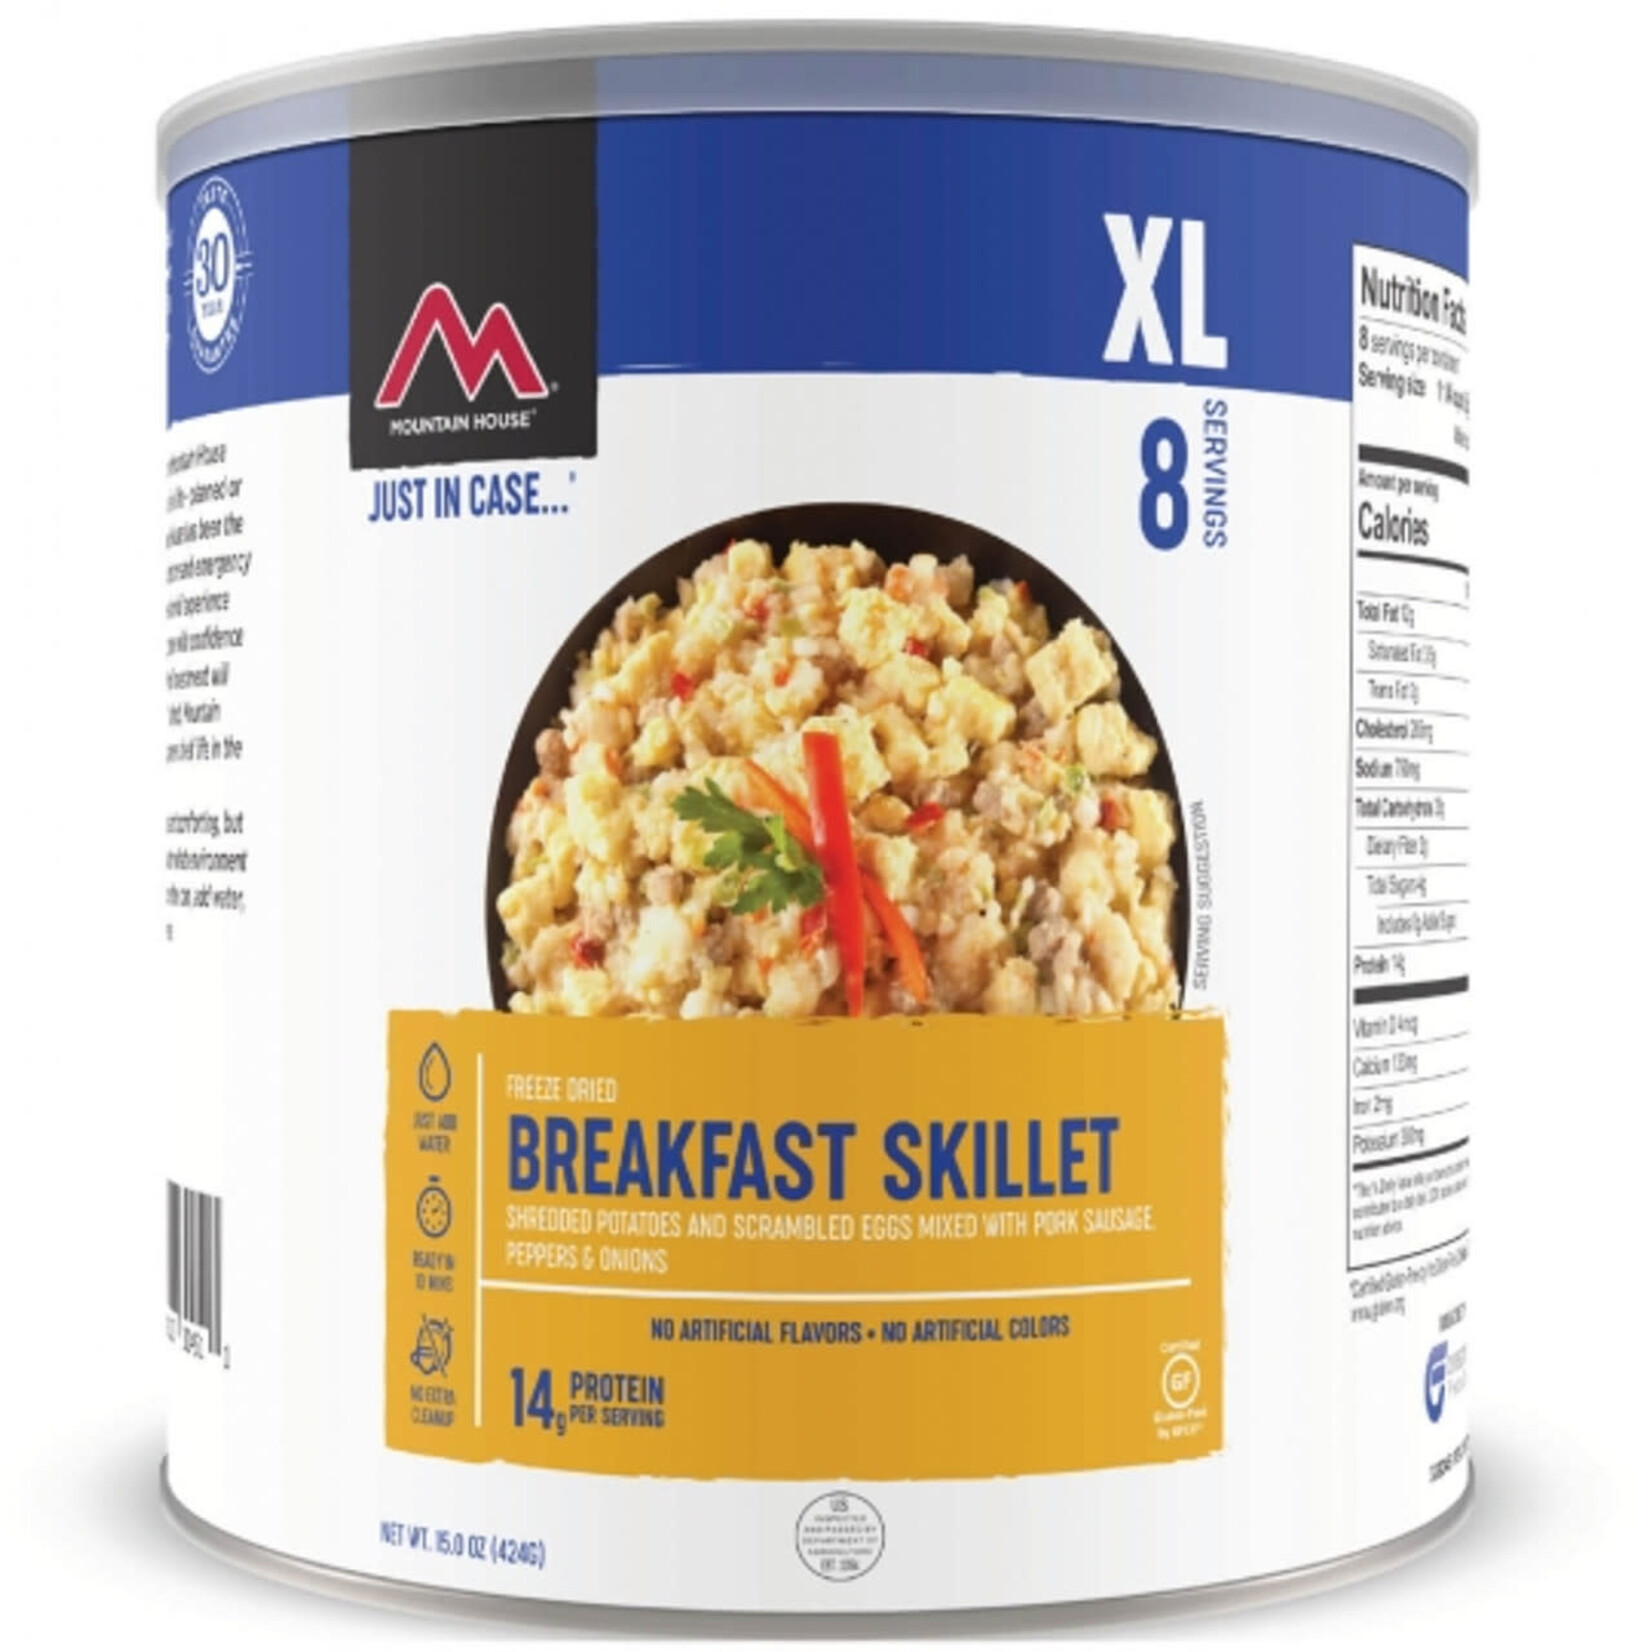 MOUNTAIN HOUSE Breakfast Skillet #10 Can 8 servings XL